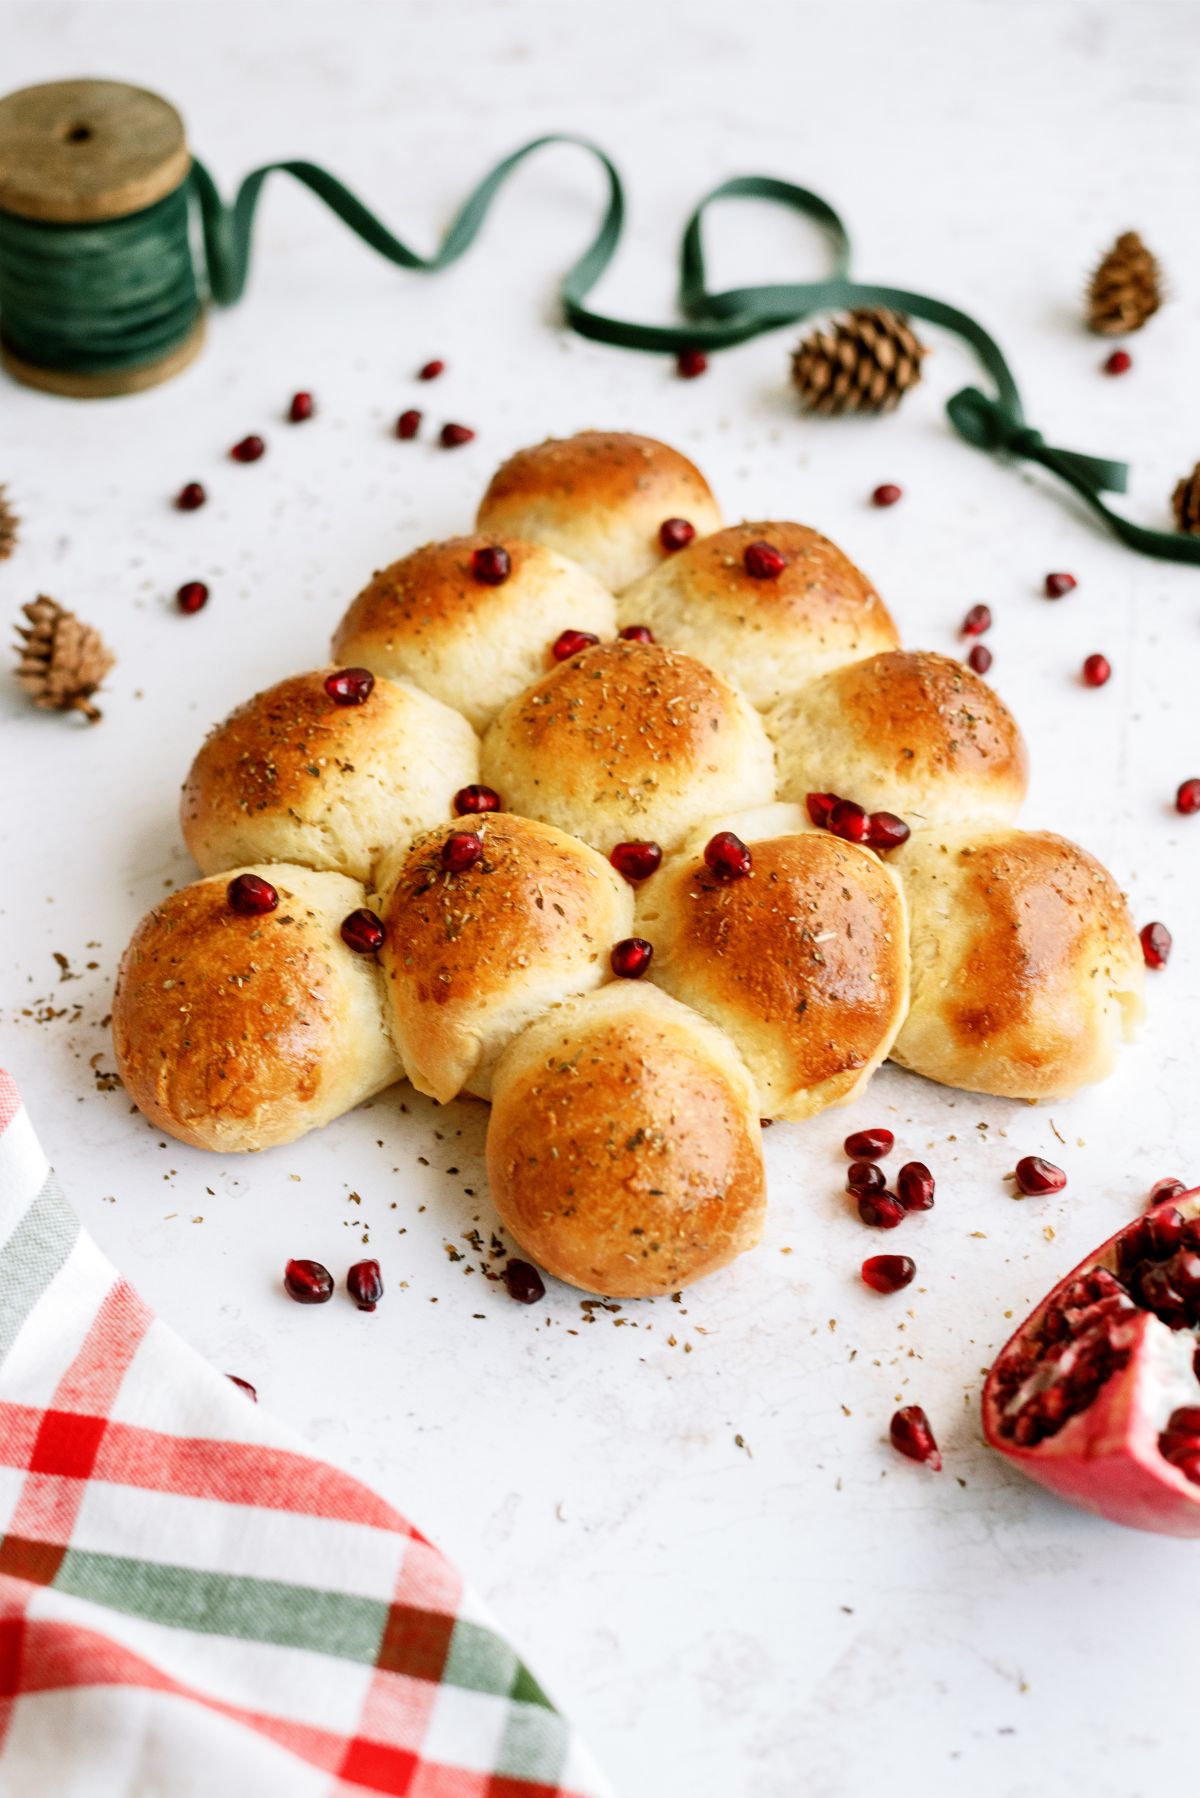 Baked Christmas Tree Dinner Rolls topped with Pomegranate seeds